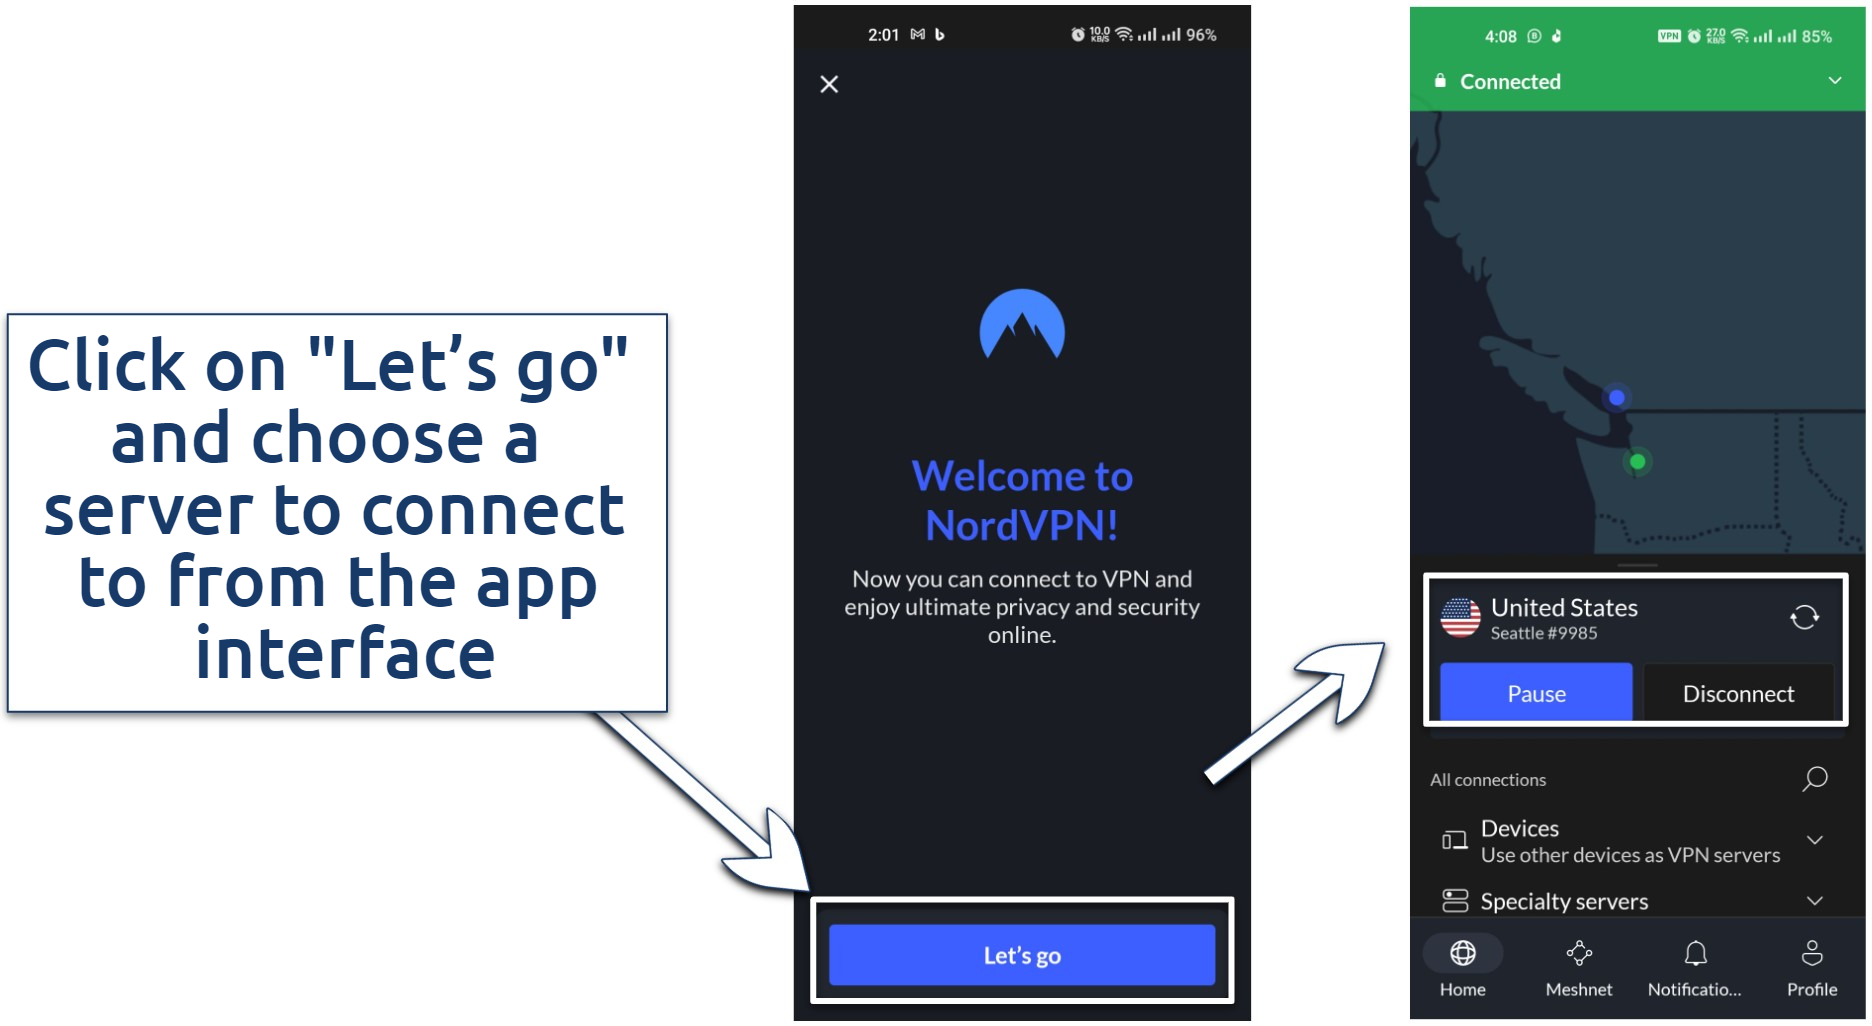 Image showing the NordVPN app interface with a US server connected